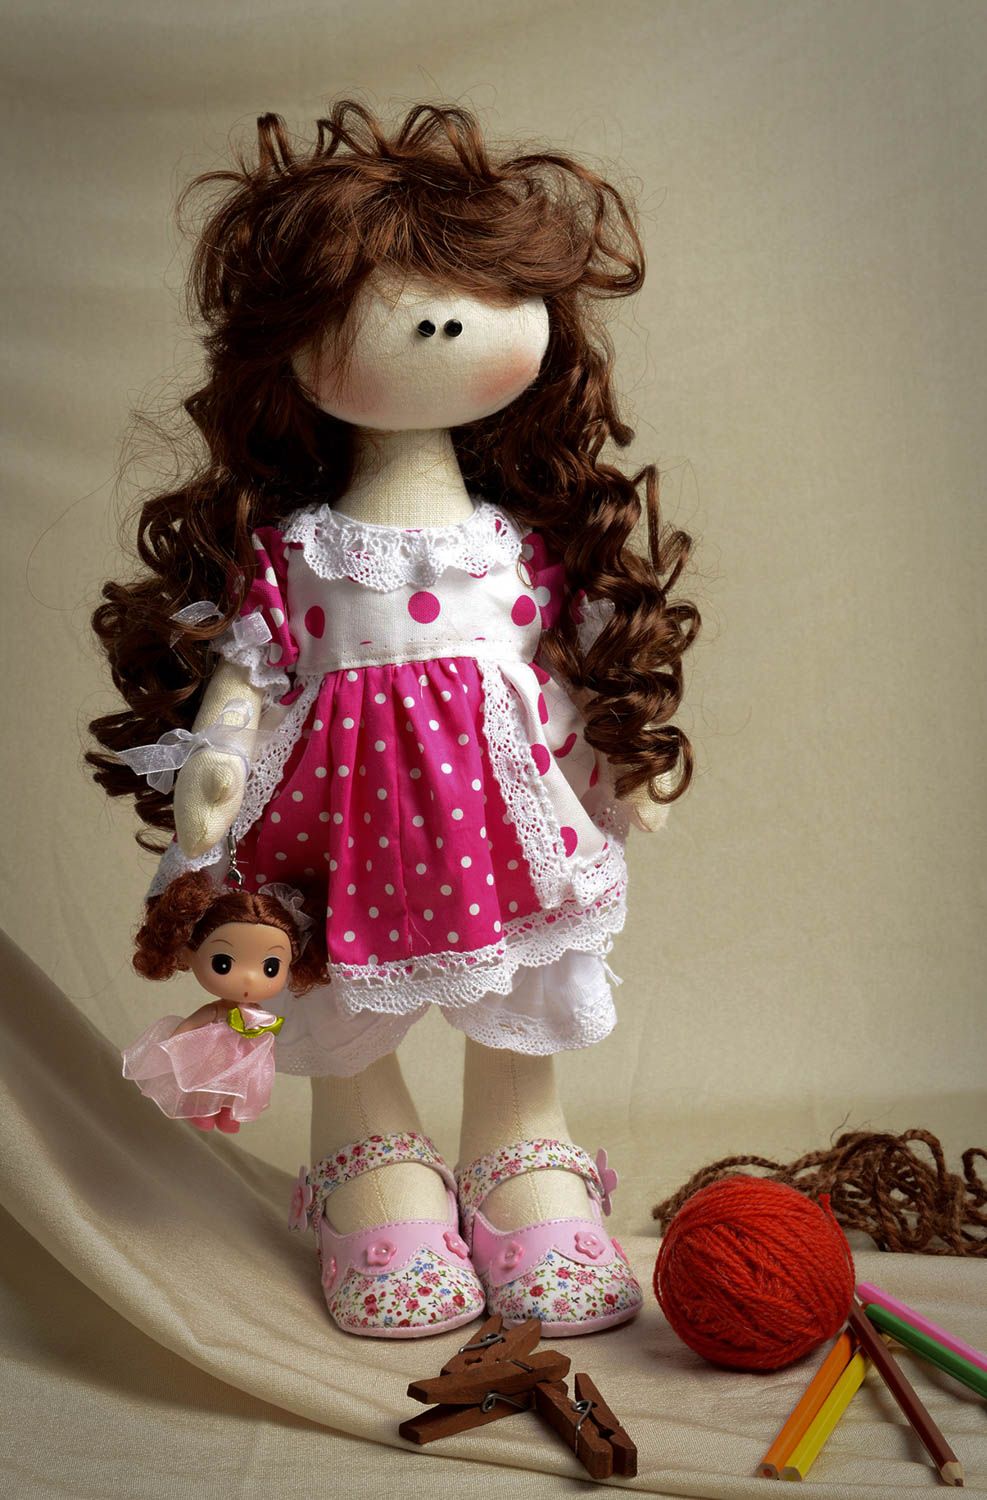 Handmade soft toy cute childrens toys rag doll for girls gift ideas for kids photo 5